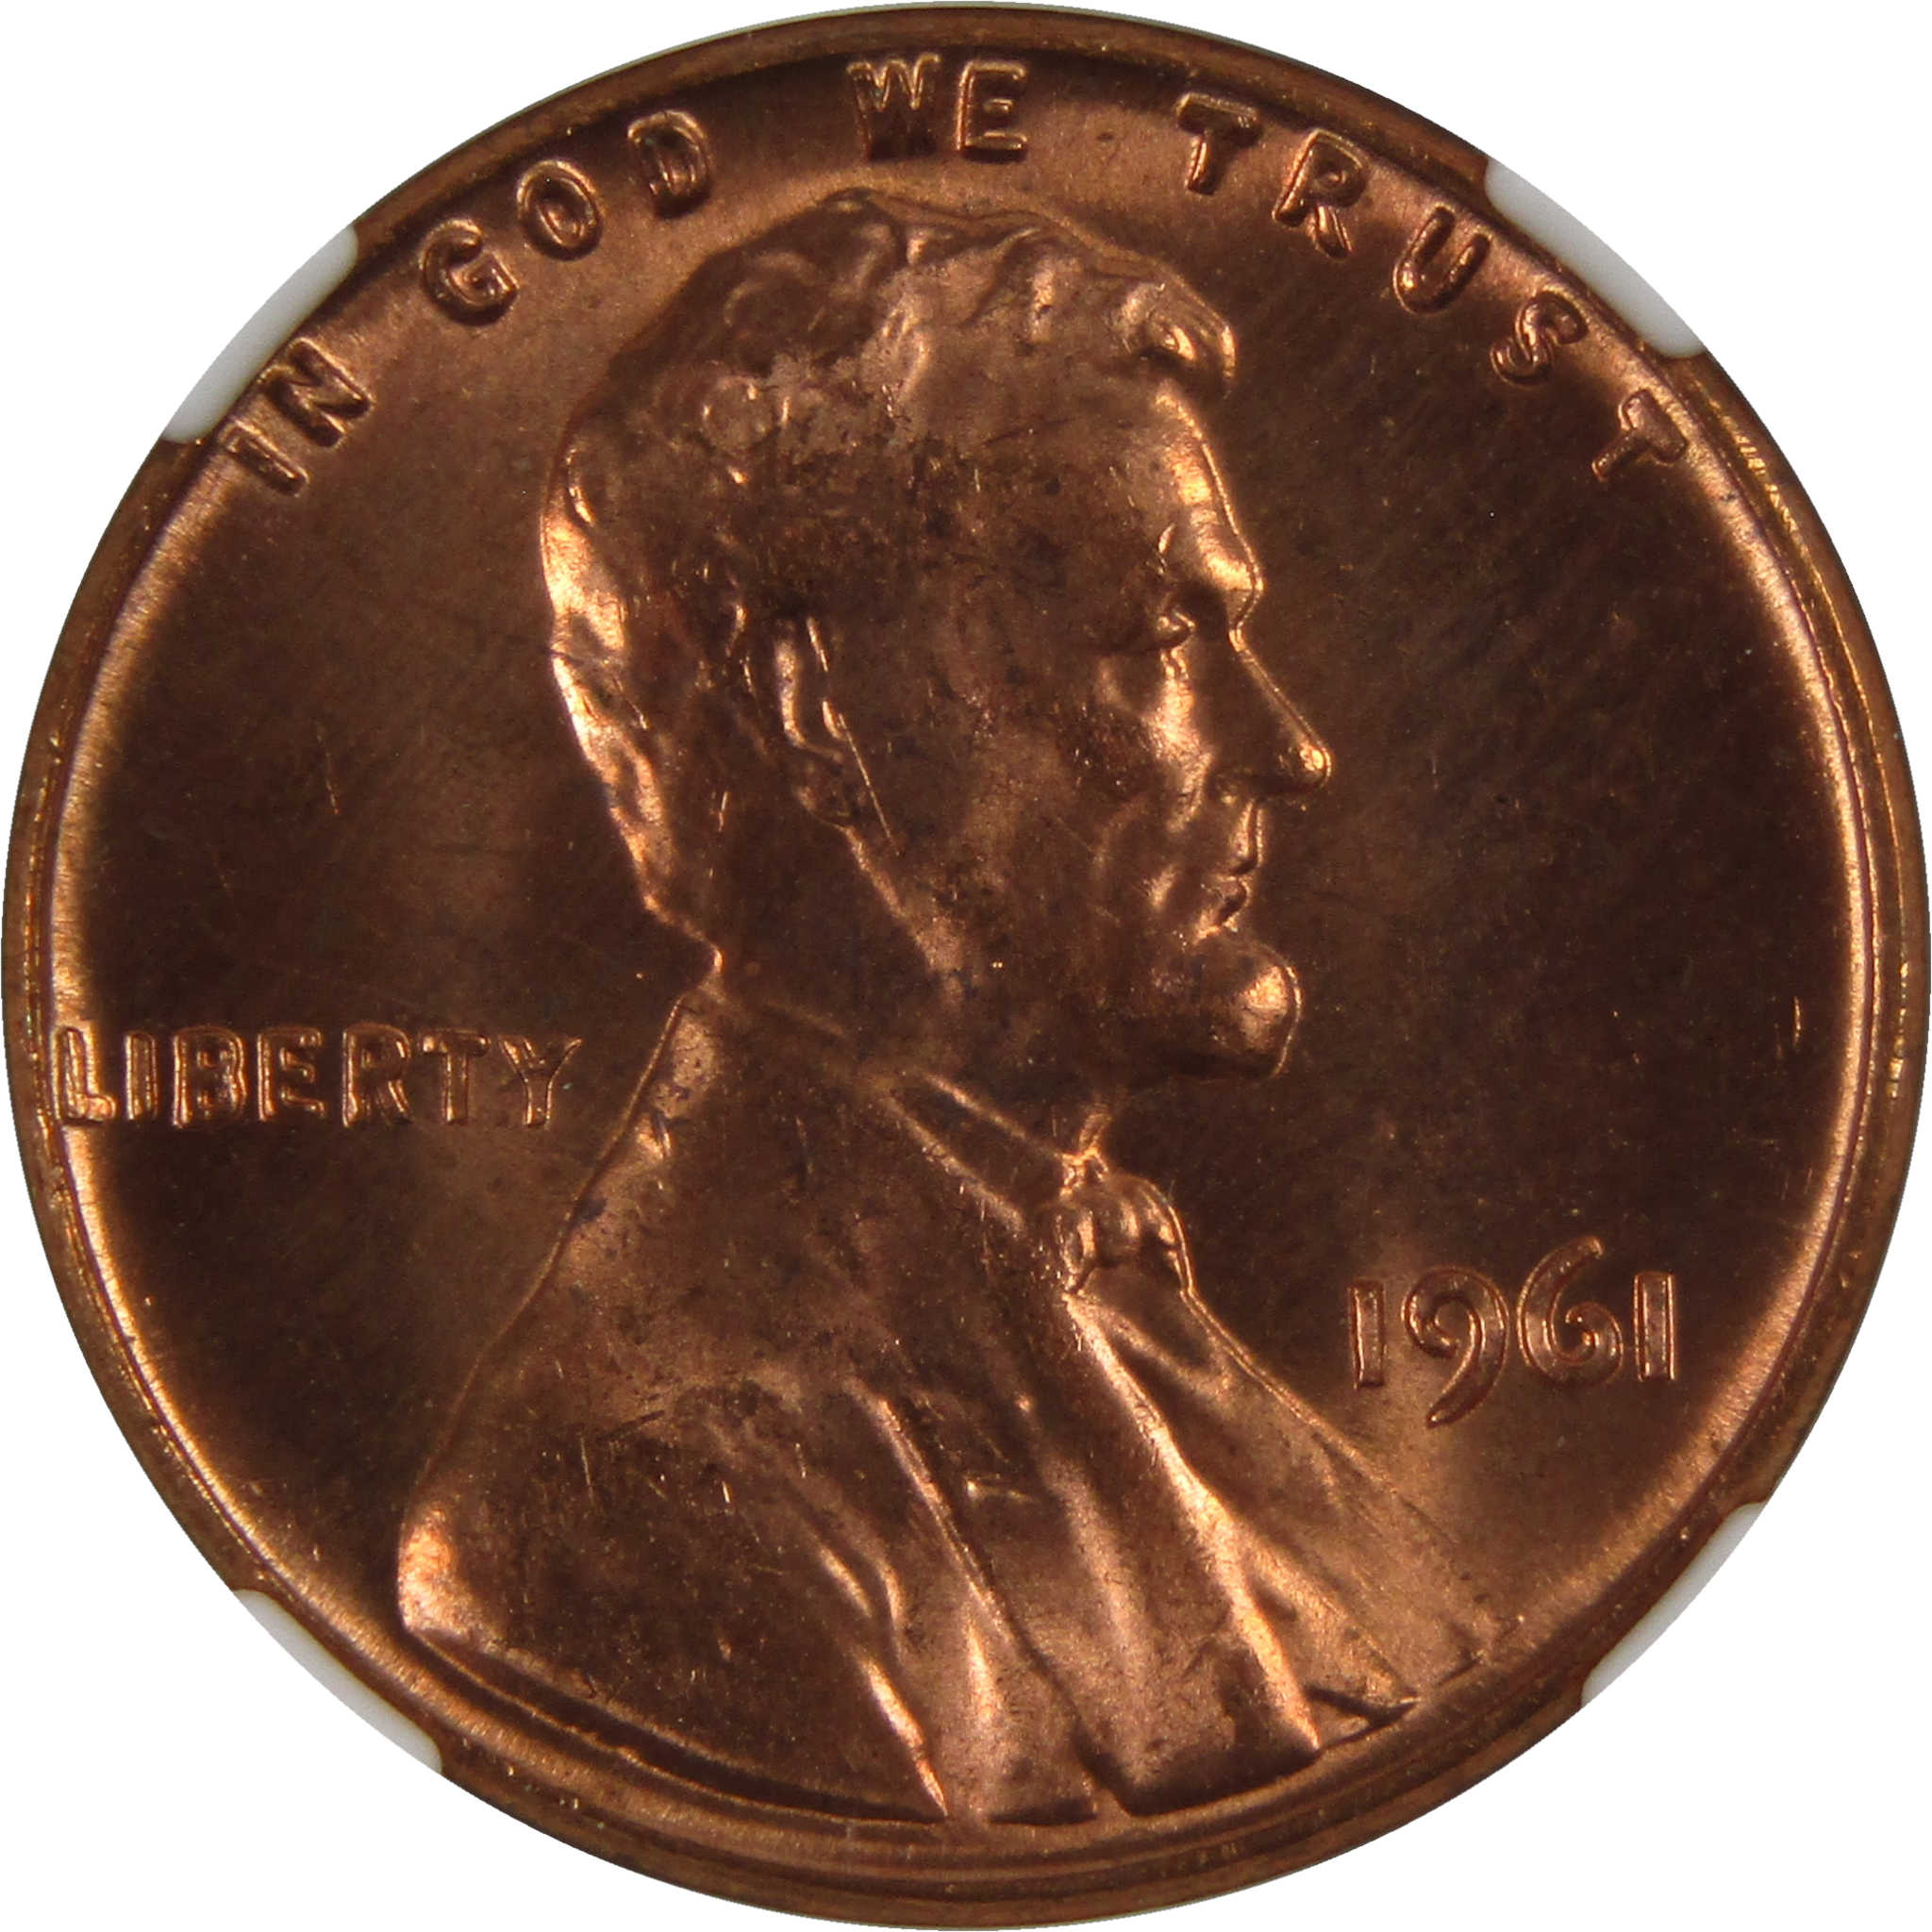 1961 Lincoln Memorial Cent MS 66 RD NGC Penny Uncirculated SKU:I3699